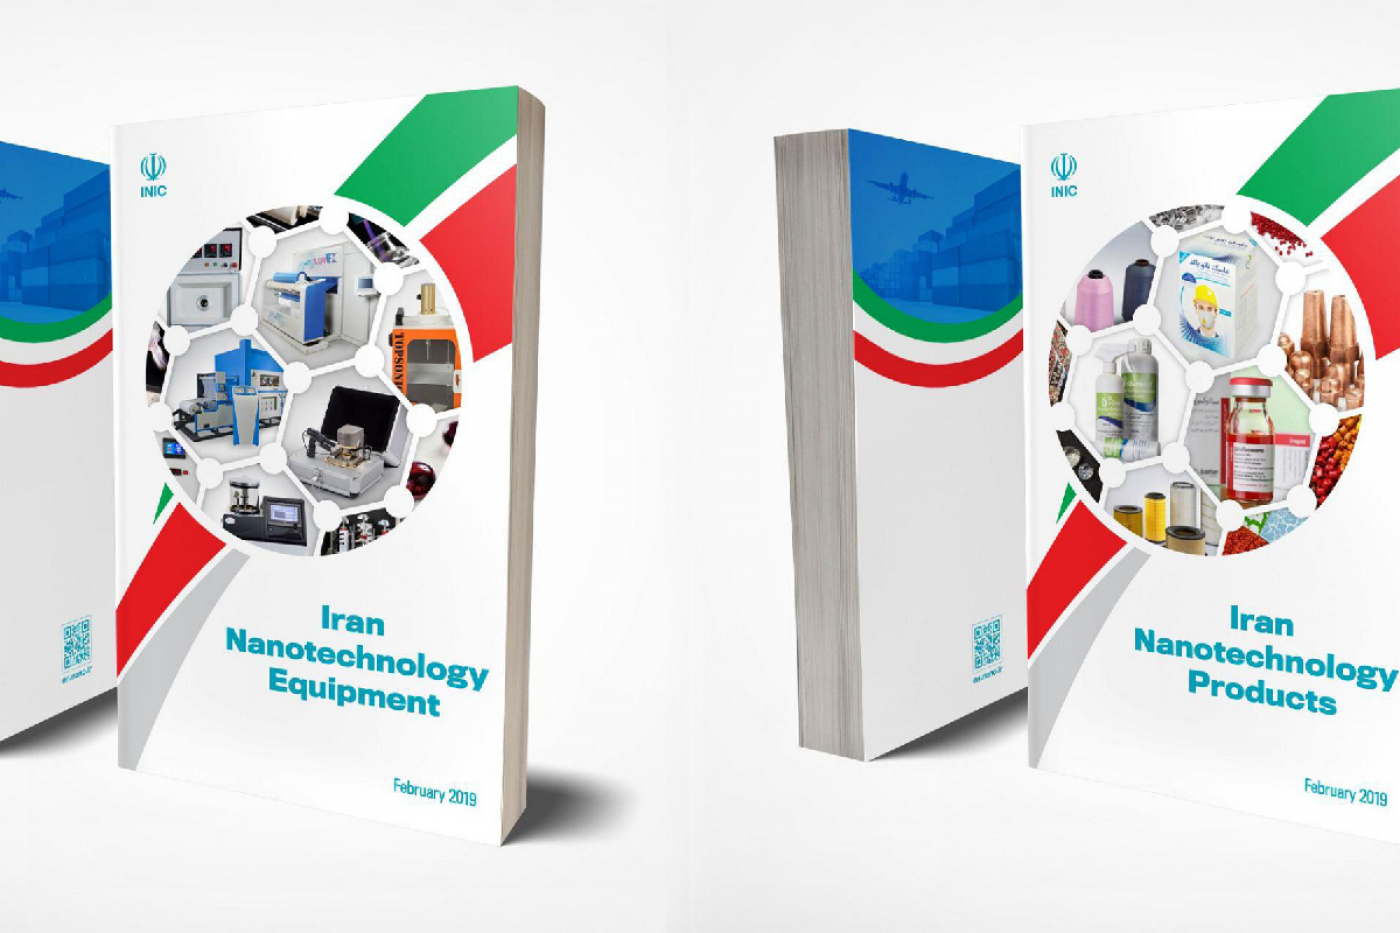 Iran Nanotechnology Products and Equipment Book Released